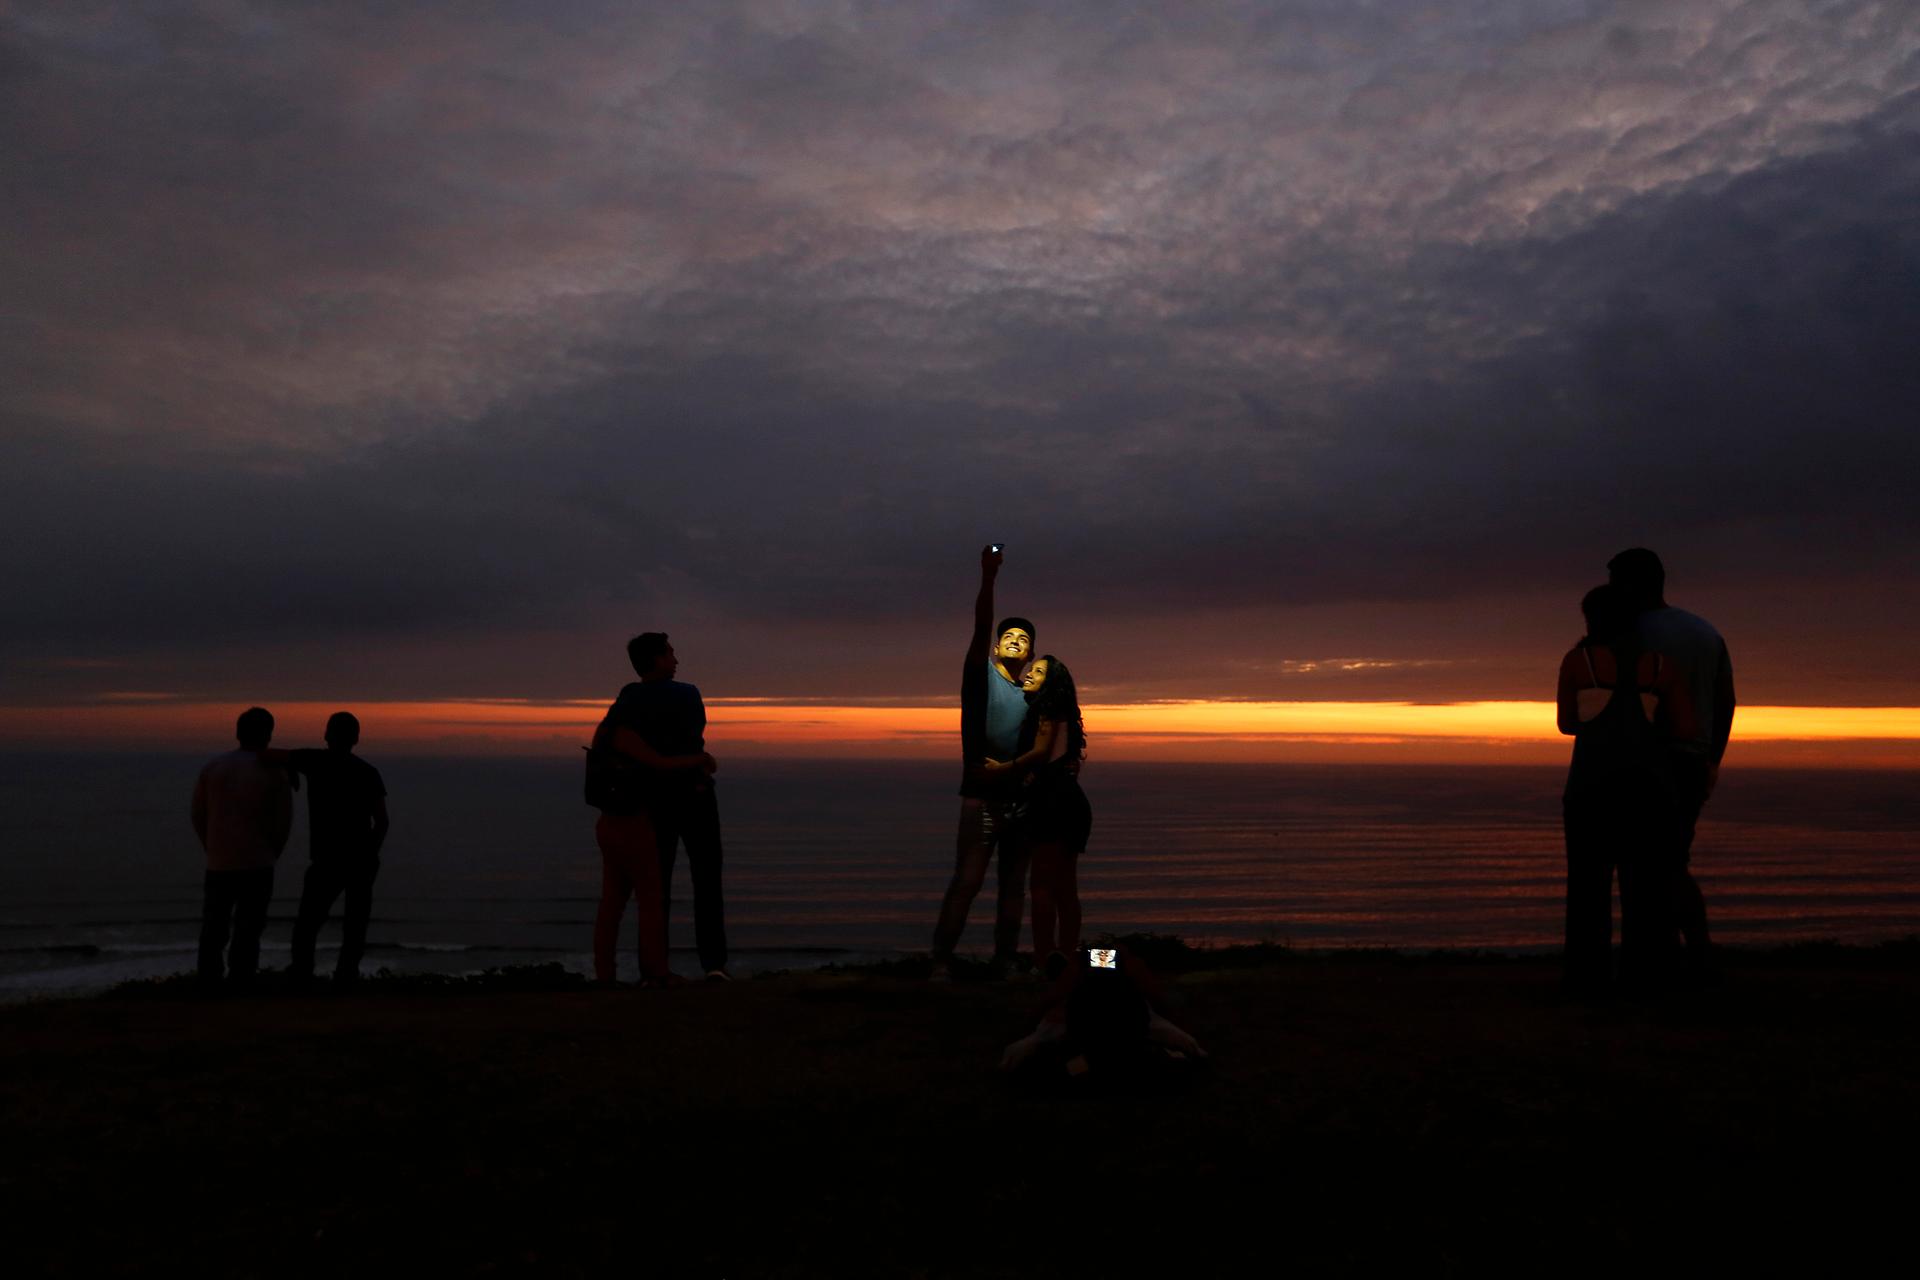 A couple takes a selfie as others observe the sunset at an oceanfront in the neighborhood of Miraflores in Lima.